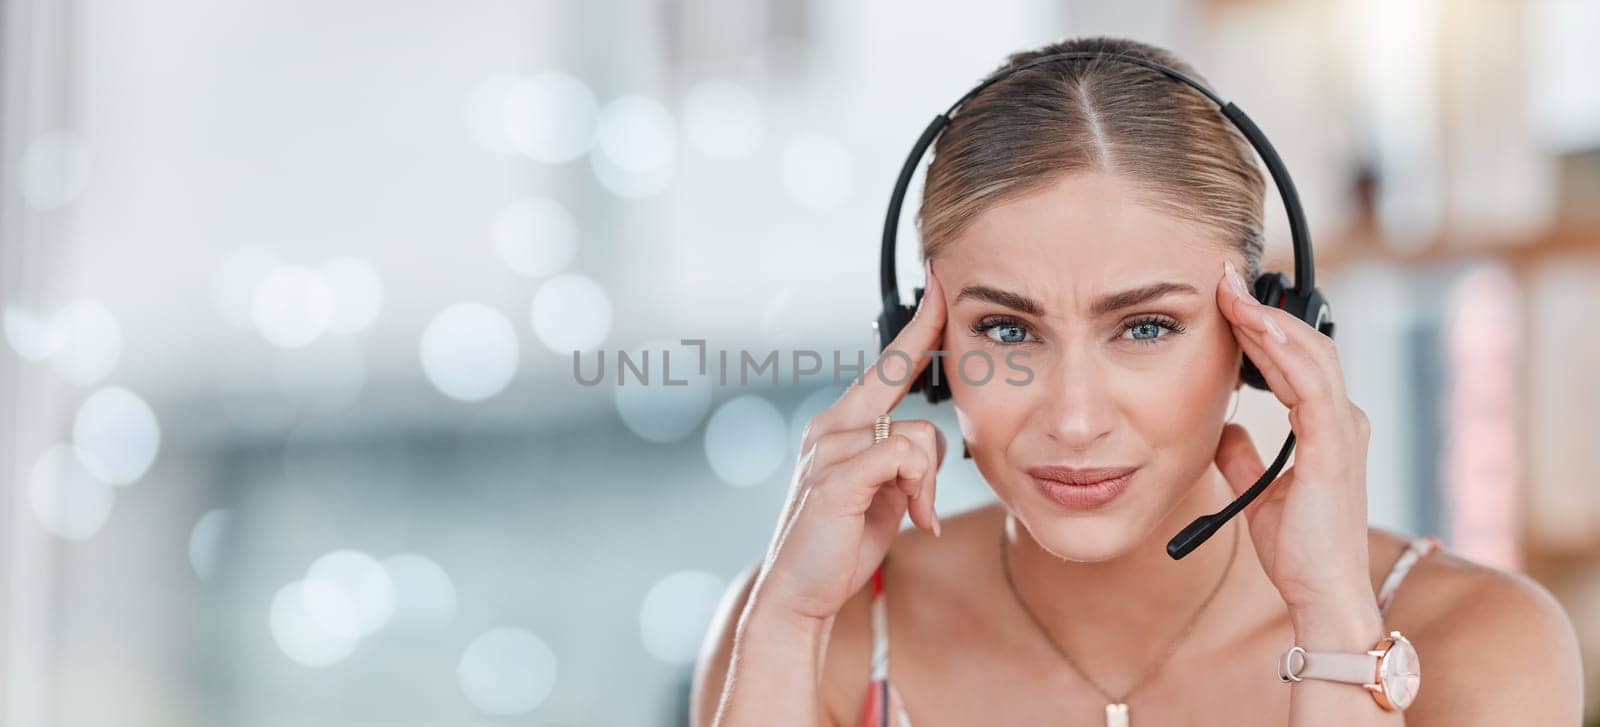 Call center, portrait and woman with headache by space for mockup in office with blurred background. Customer support consultant, agent and stress in workplace with anxiety, mental health and burnout.